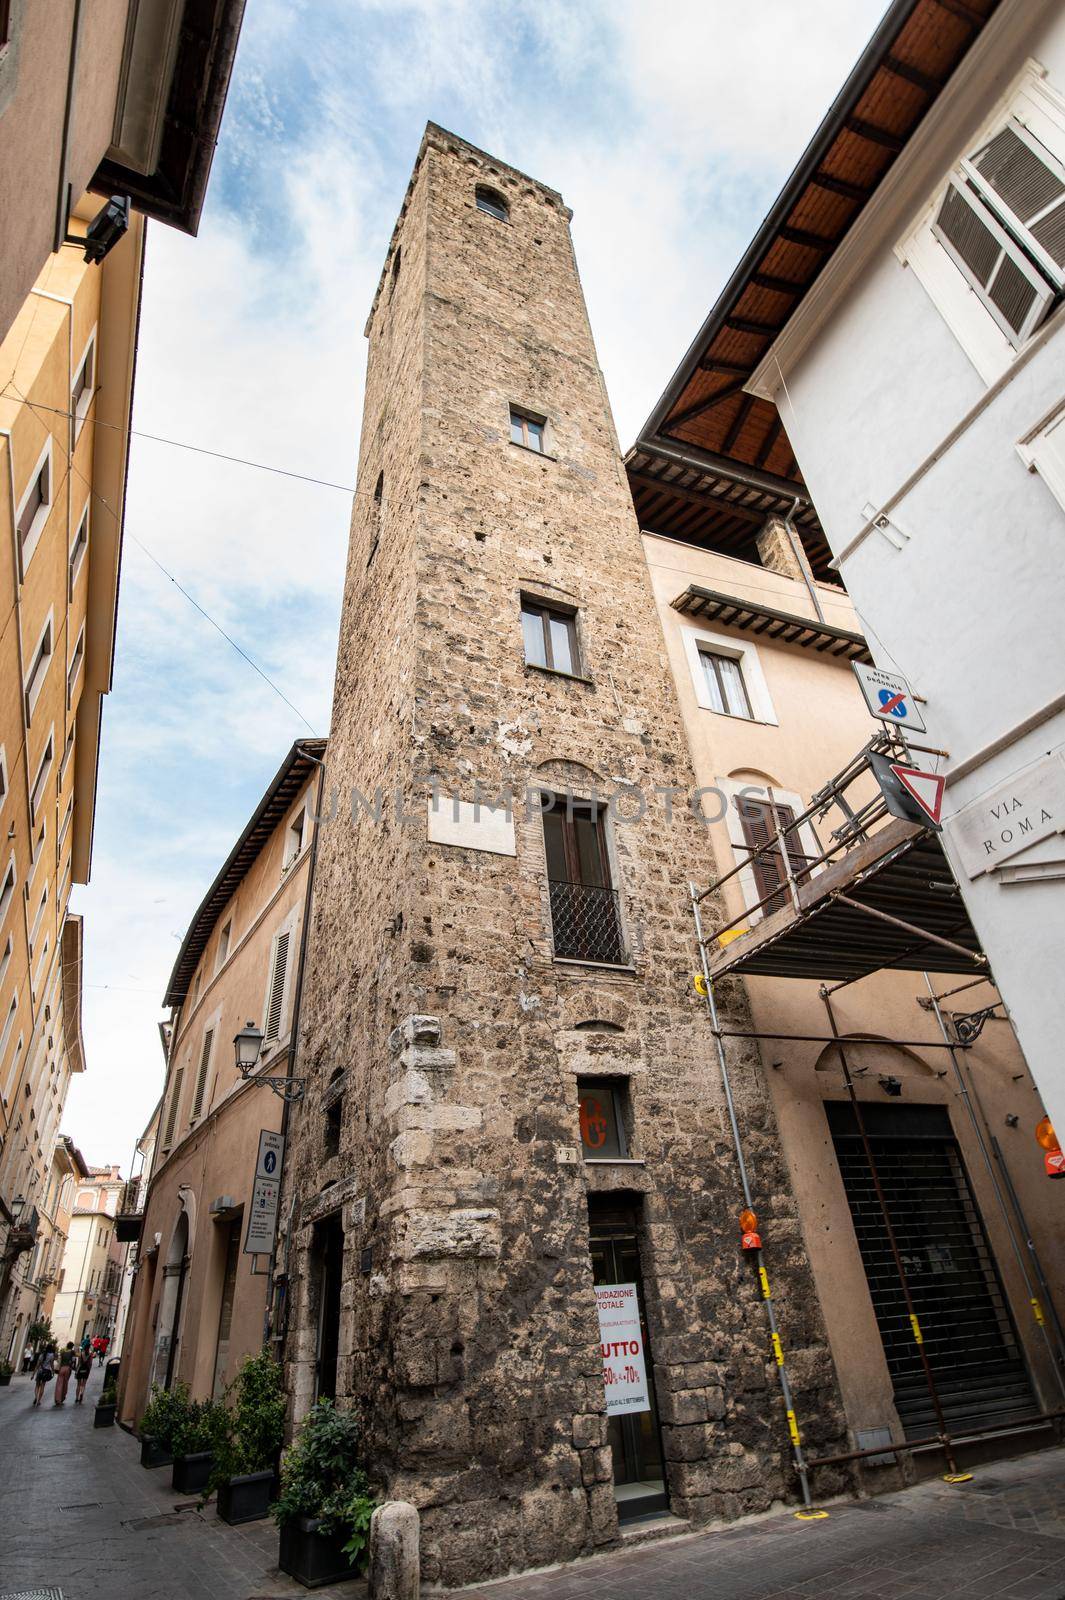 barberini tower in via roma in the historic center of the city by carfedeph